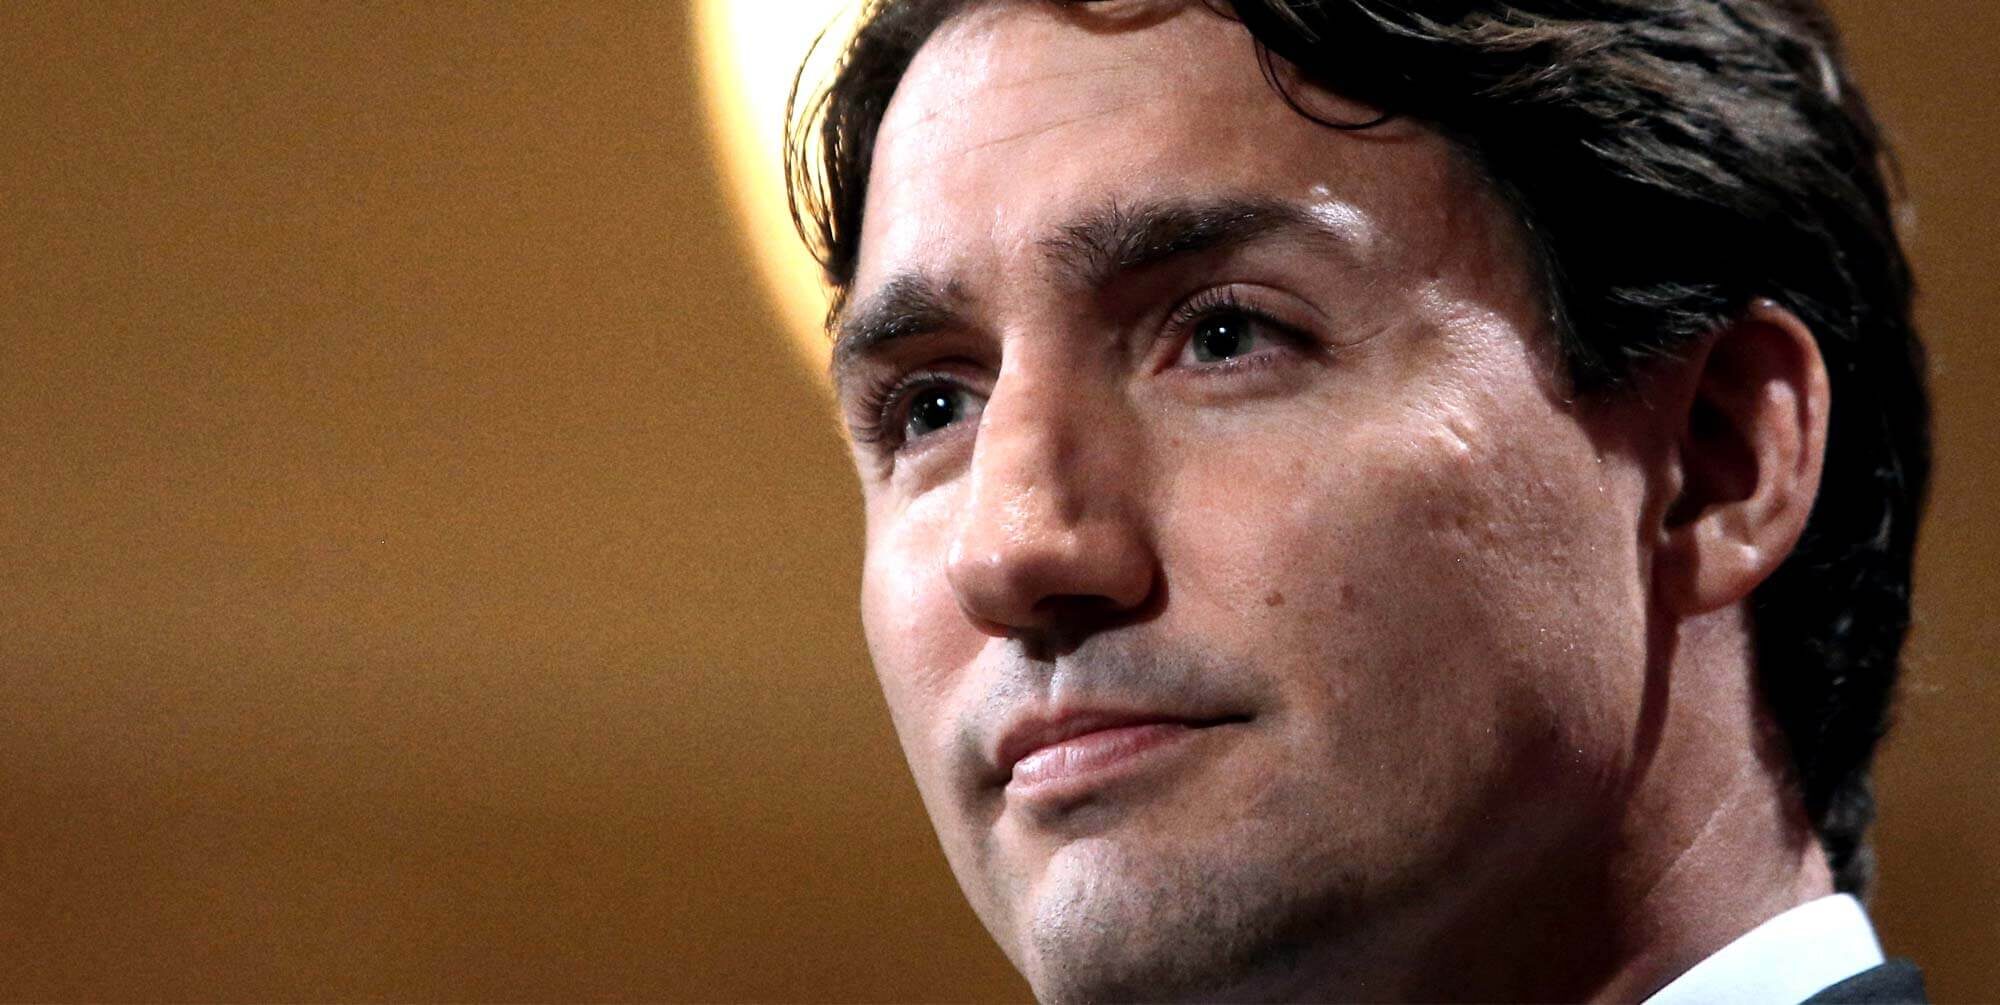 snw-website-trudeau-and-mental-health-2000x1005